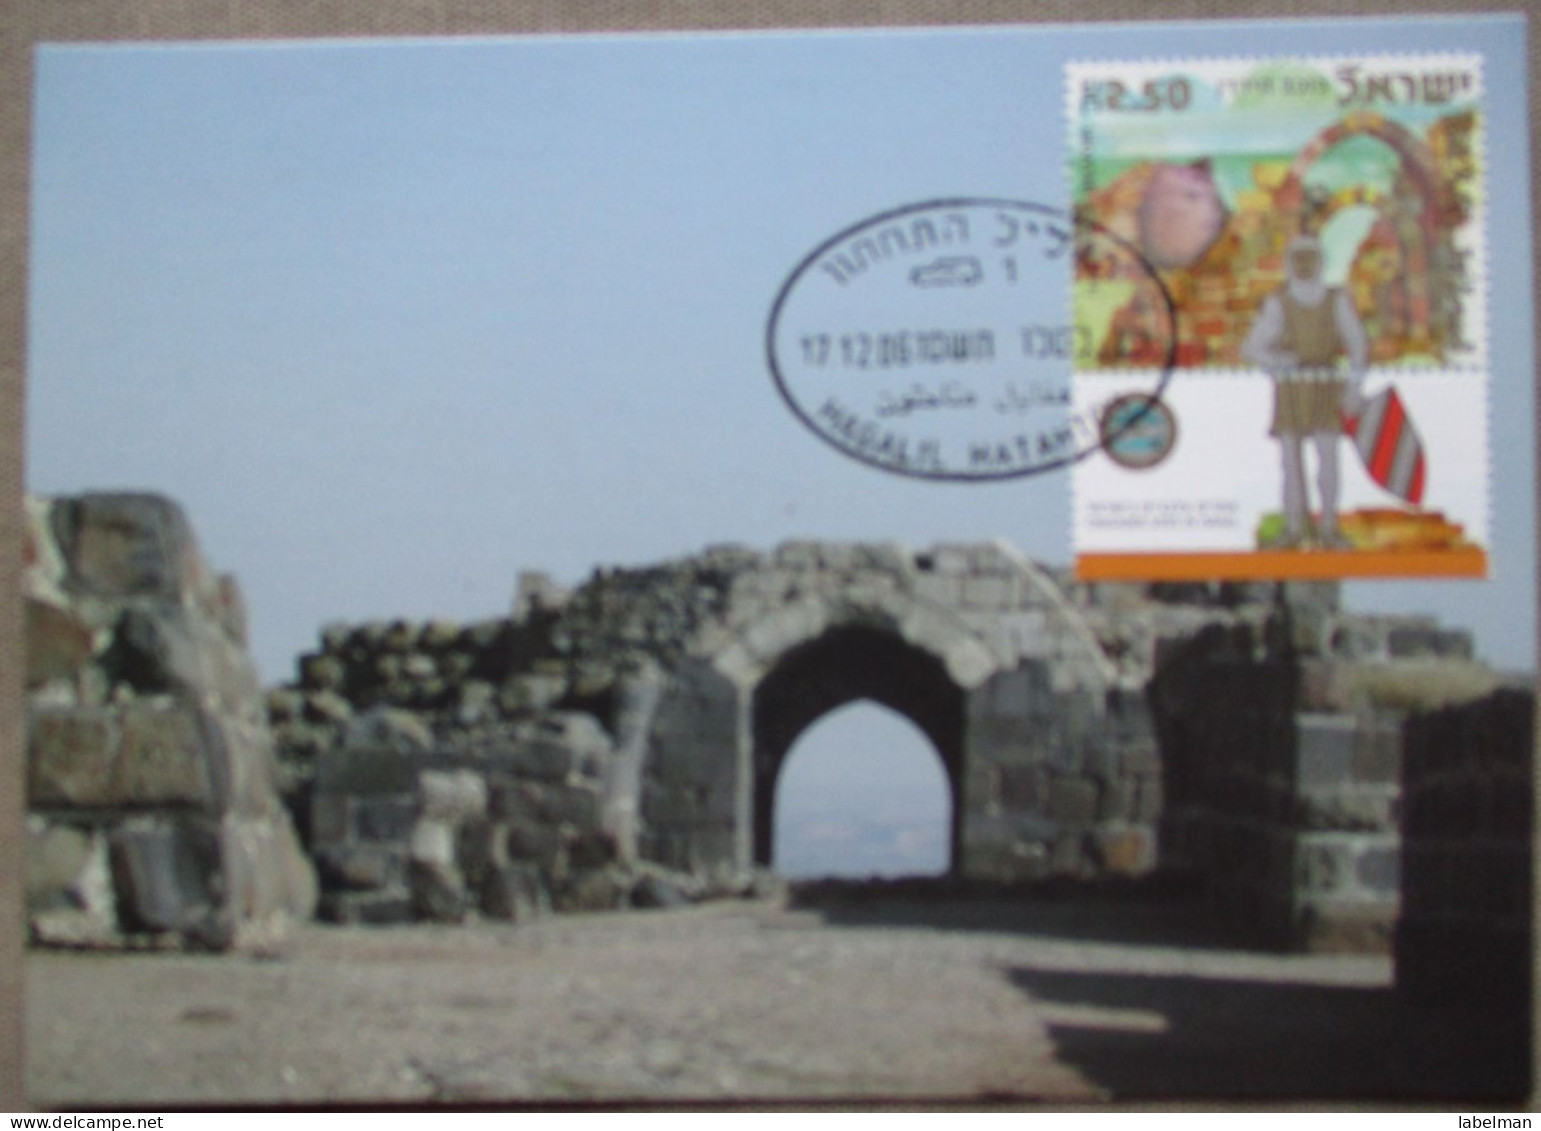 ISRAEL 2006 MAXIMUM CARD POSTCARD BELVOIR FORT GALILEE FIRST DAY OF ISSUE CARTOLINA CARTE POSTALE POSTKARTE CARTOLINA - Cartoline Maximum